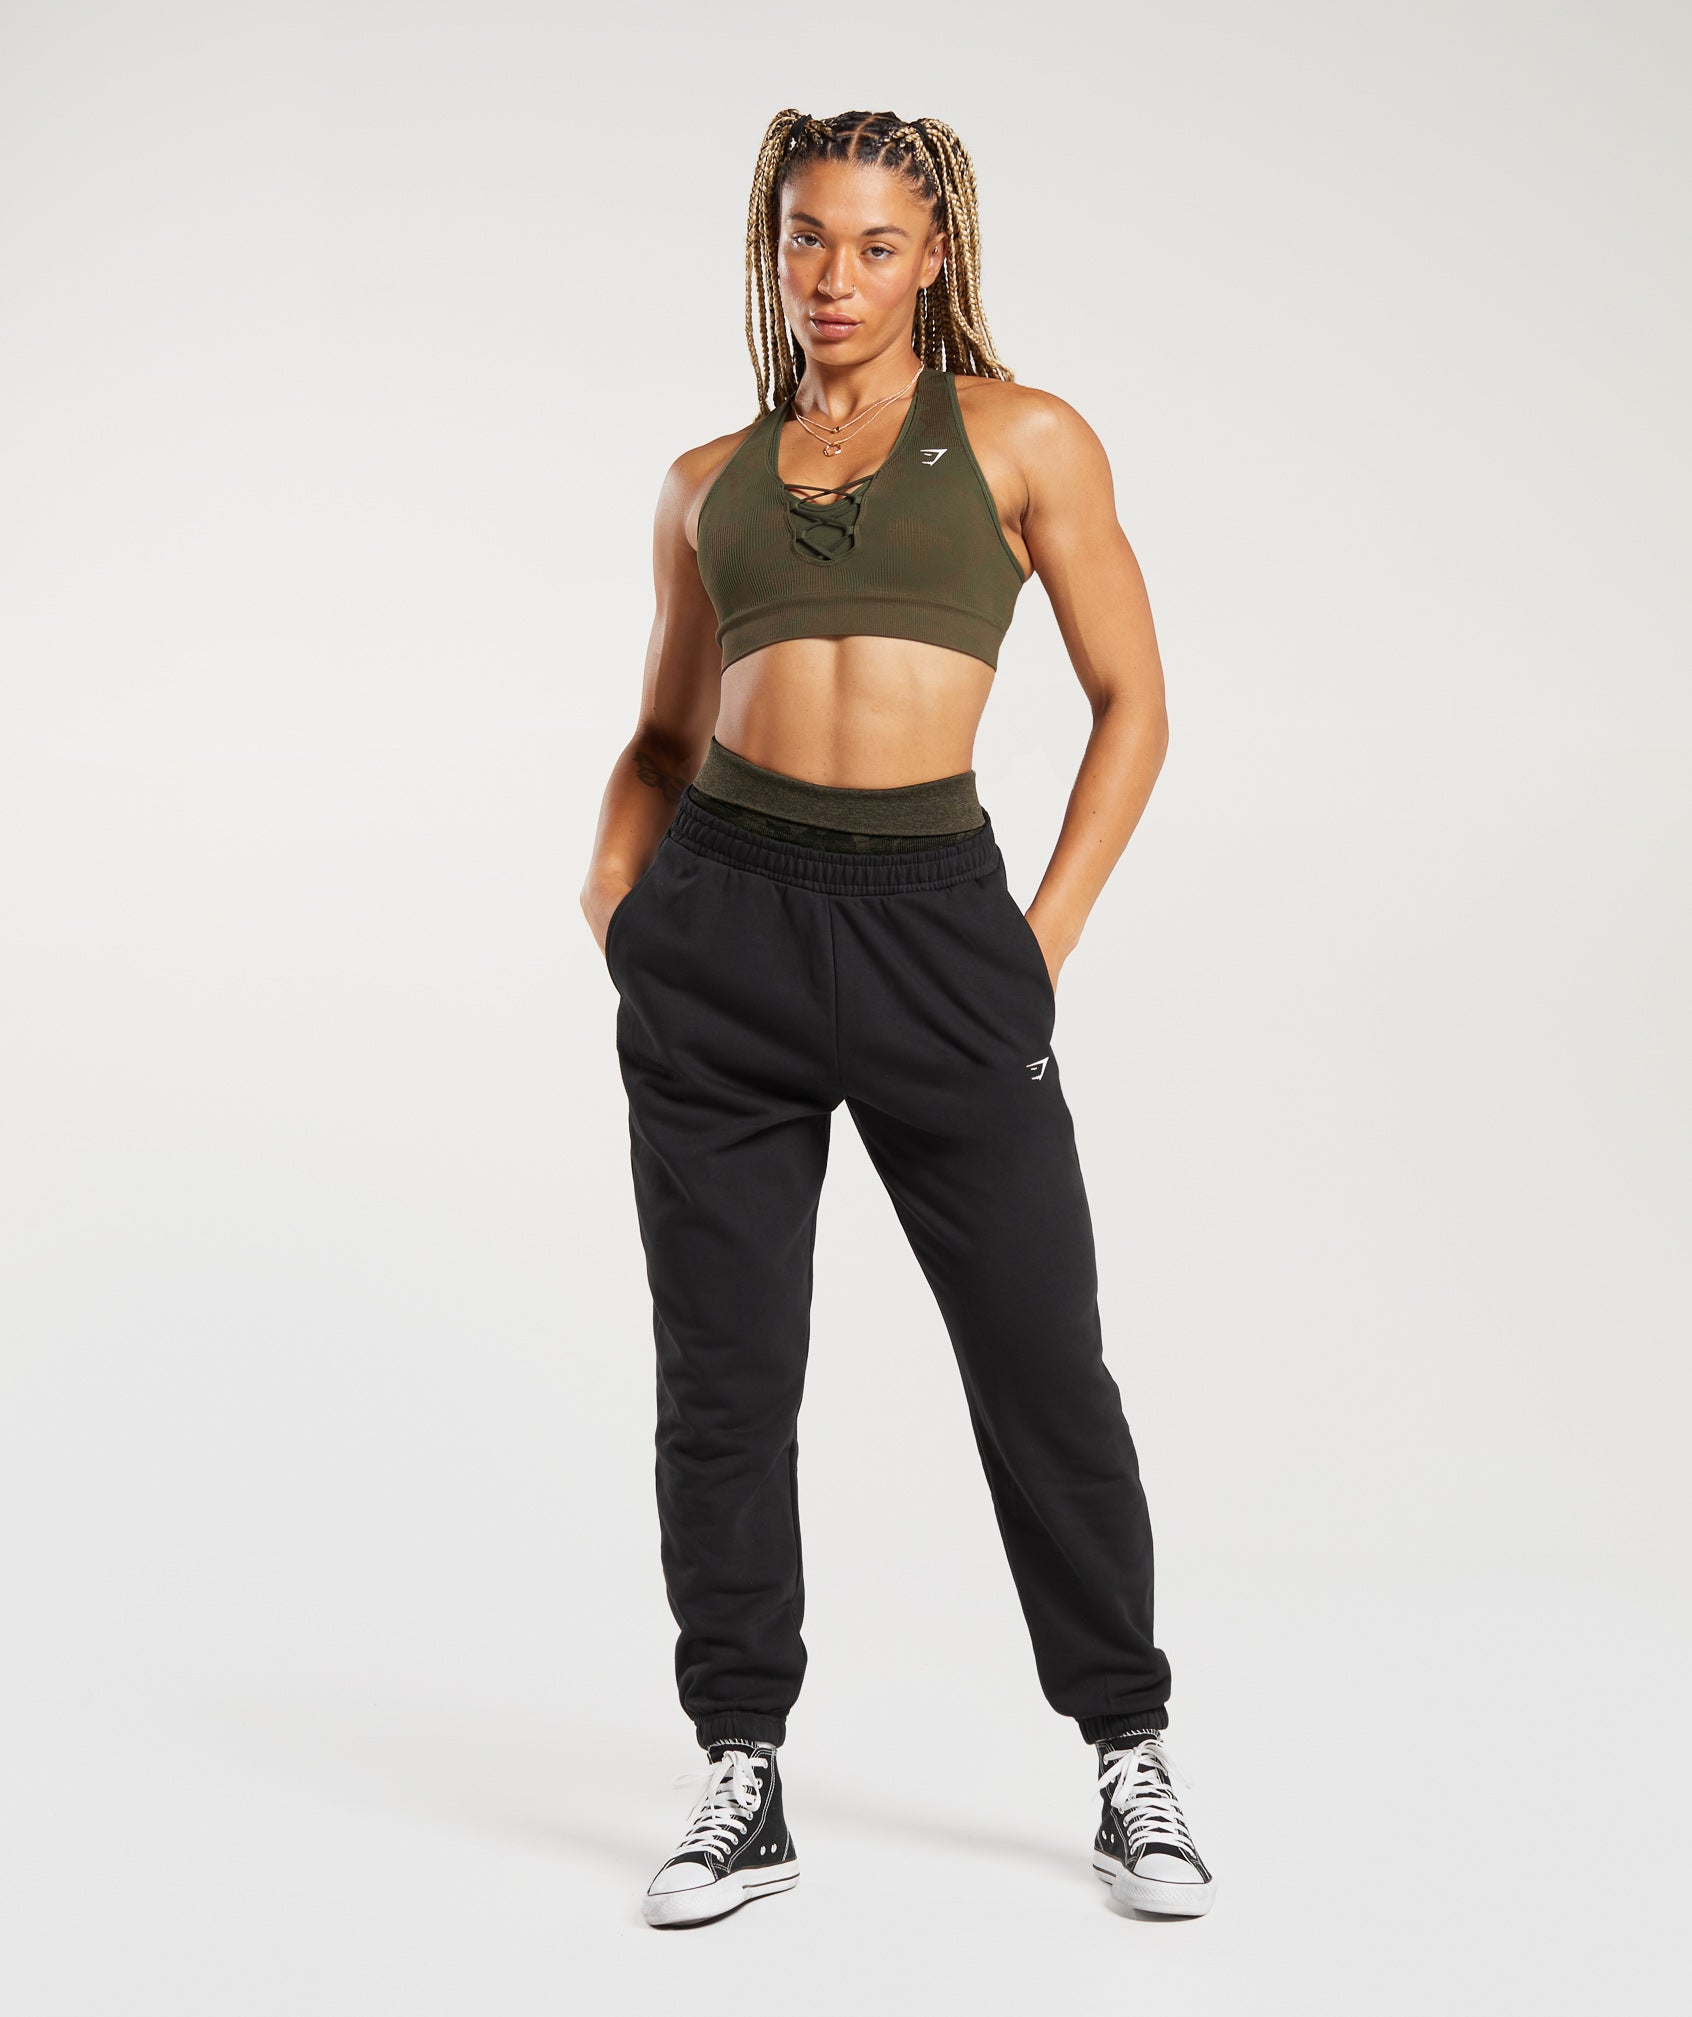 Gymshark Adapt Camo Sports Bra Green - $38 (24% Off Retail) - From Robyn